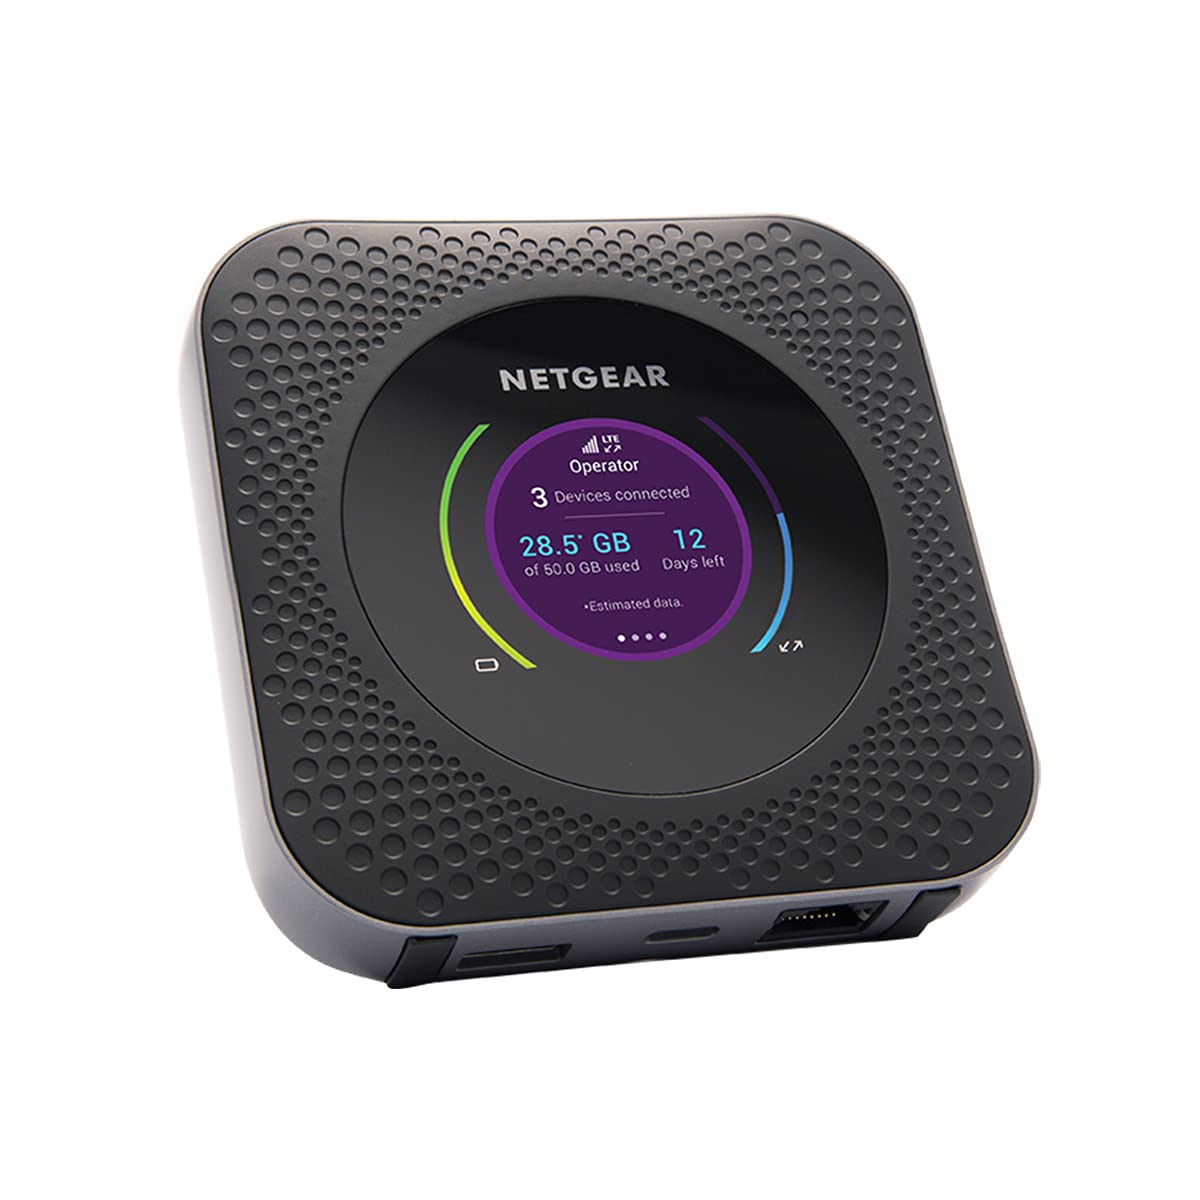 Nighthawk M1 Mobile Hotspot 4G LTE Router Up to 1Gbps Speed | (MR1100-100NAS) – Connect up to 20 Devices |